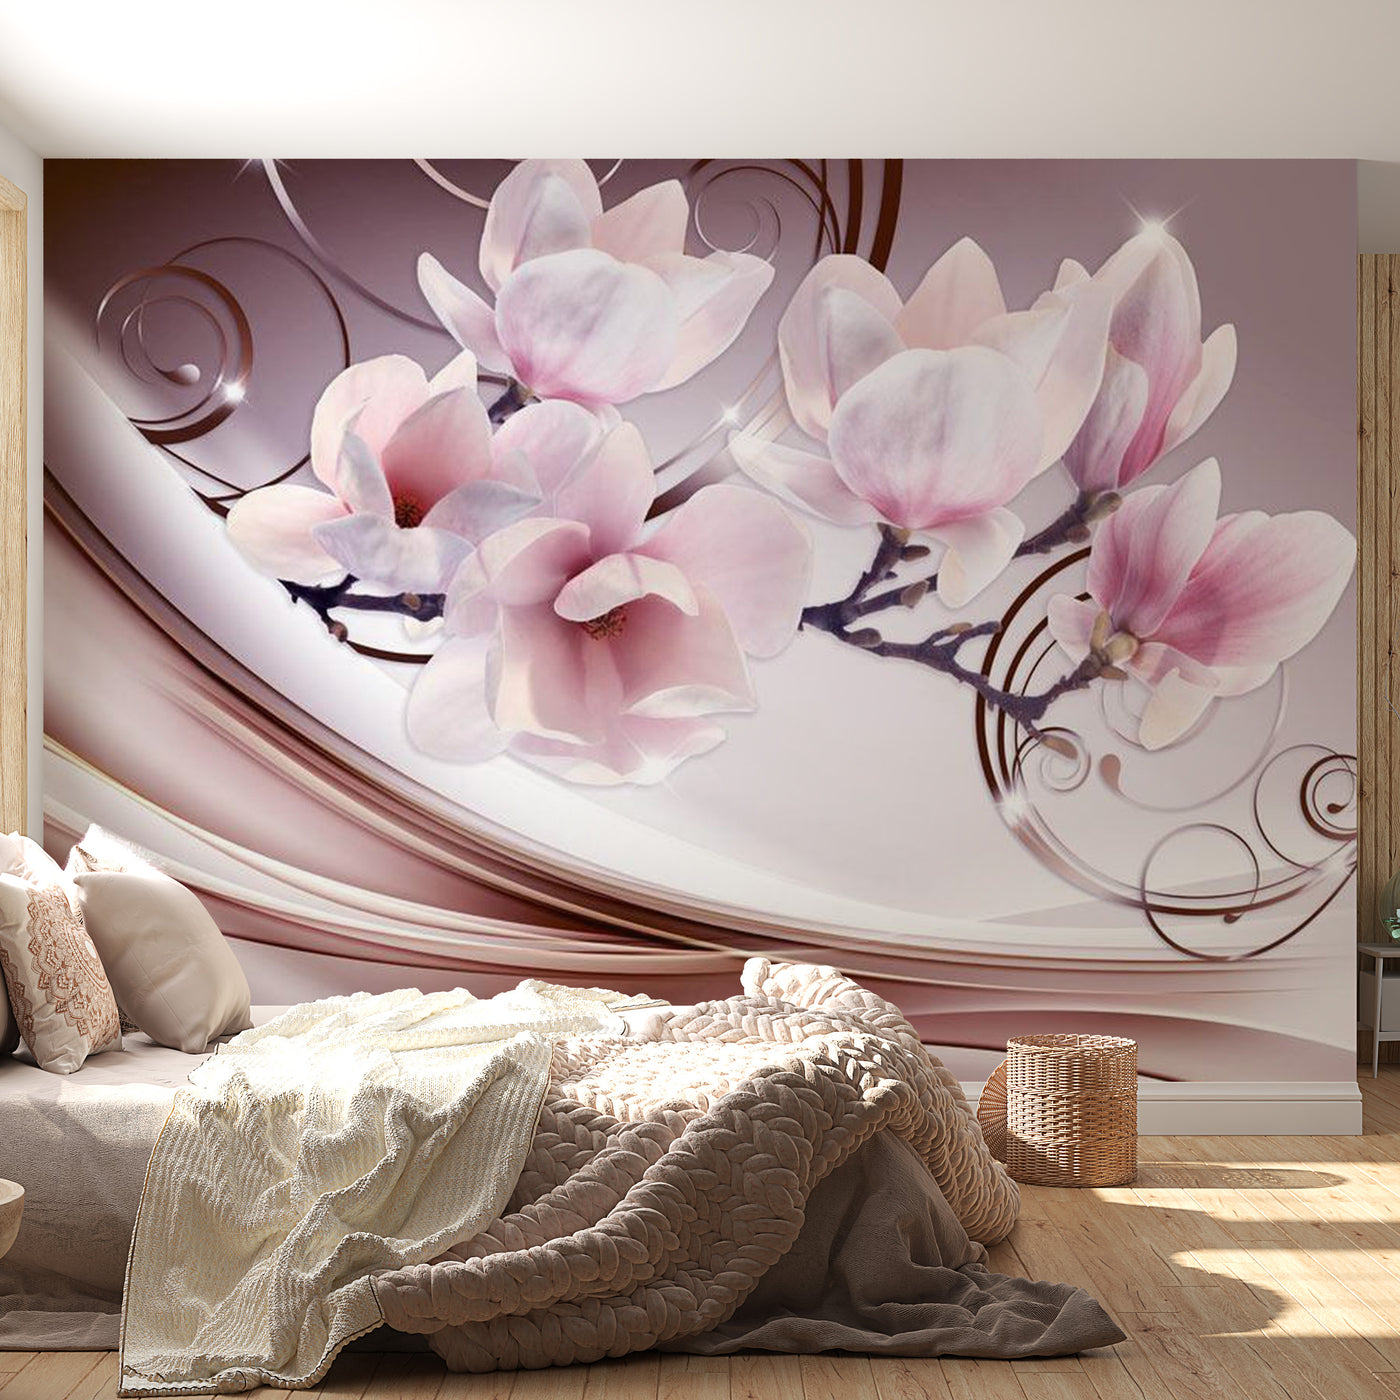 Peel & Stick Floral Wall Mural - Meet The Magnolias - Removable Wall Decals